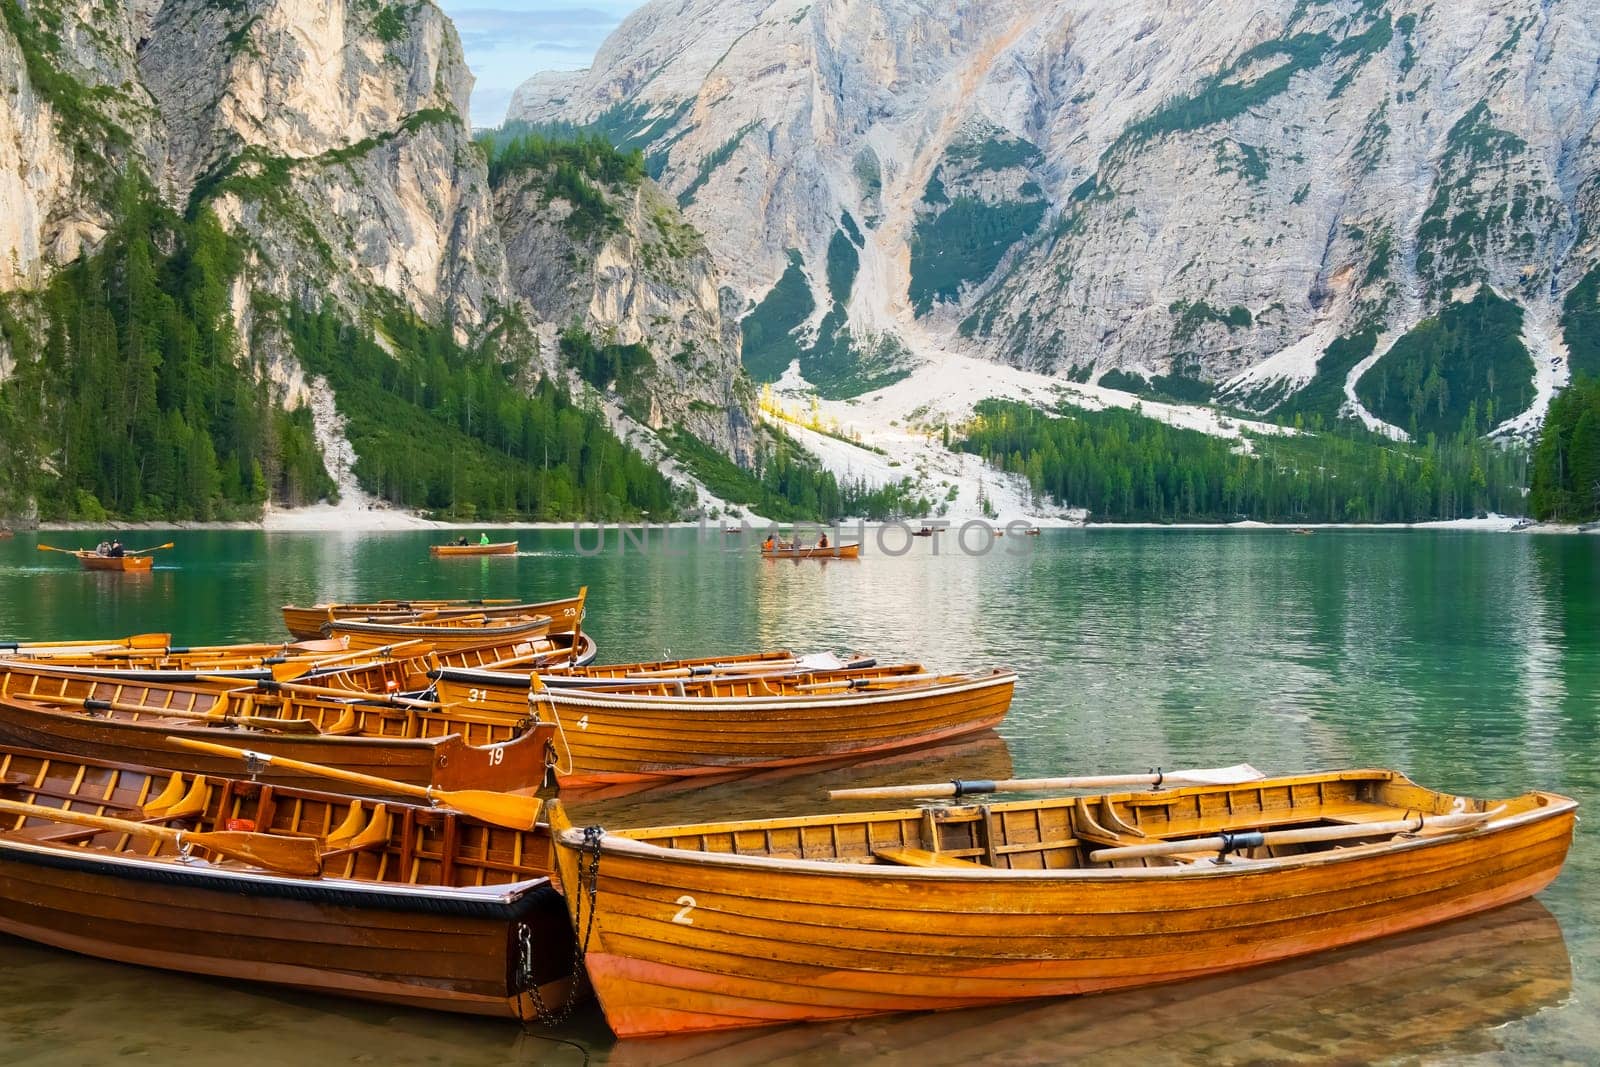 The magnificent Lake Braies with the chain of wooden boats in Dolomites Alps, Italy by vladimka